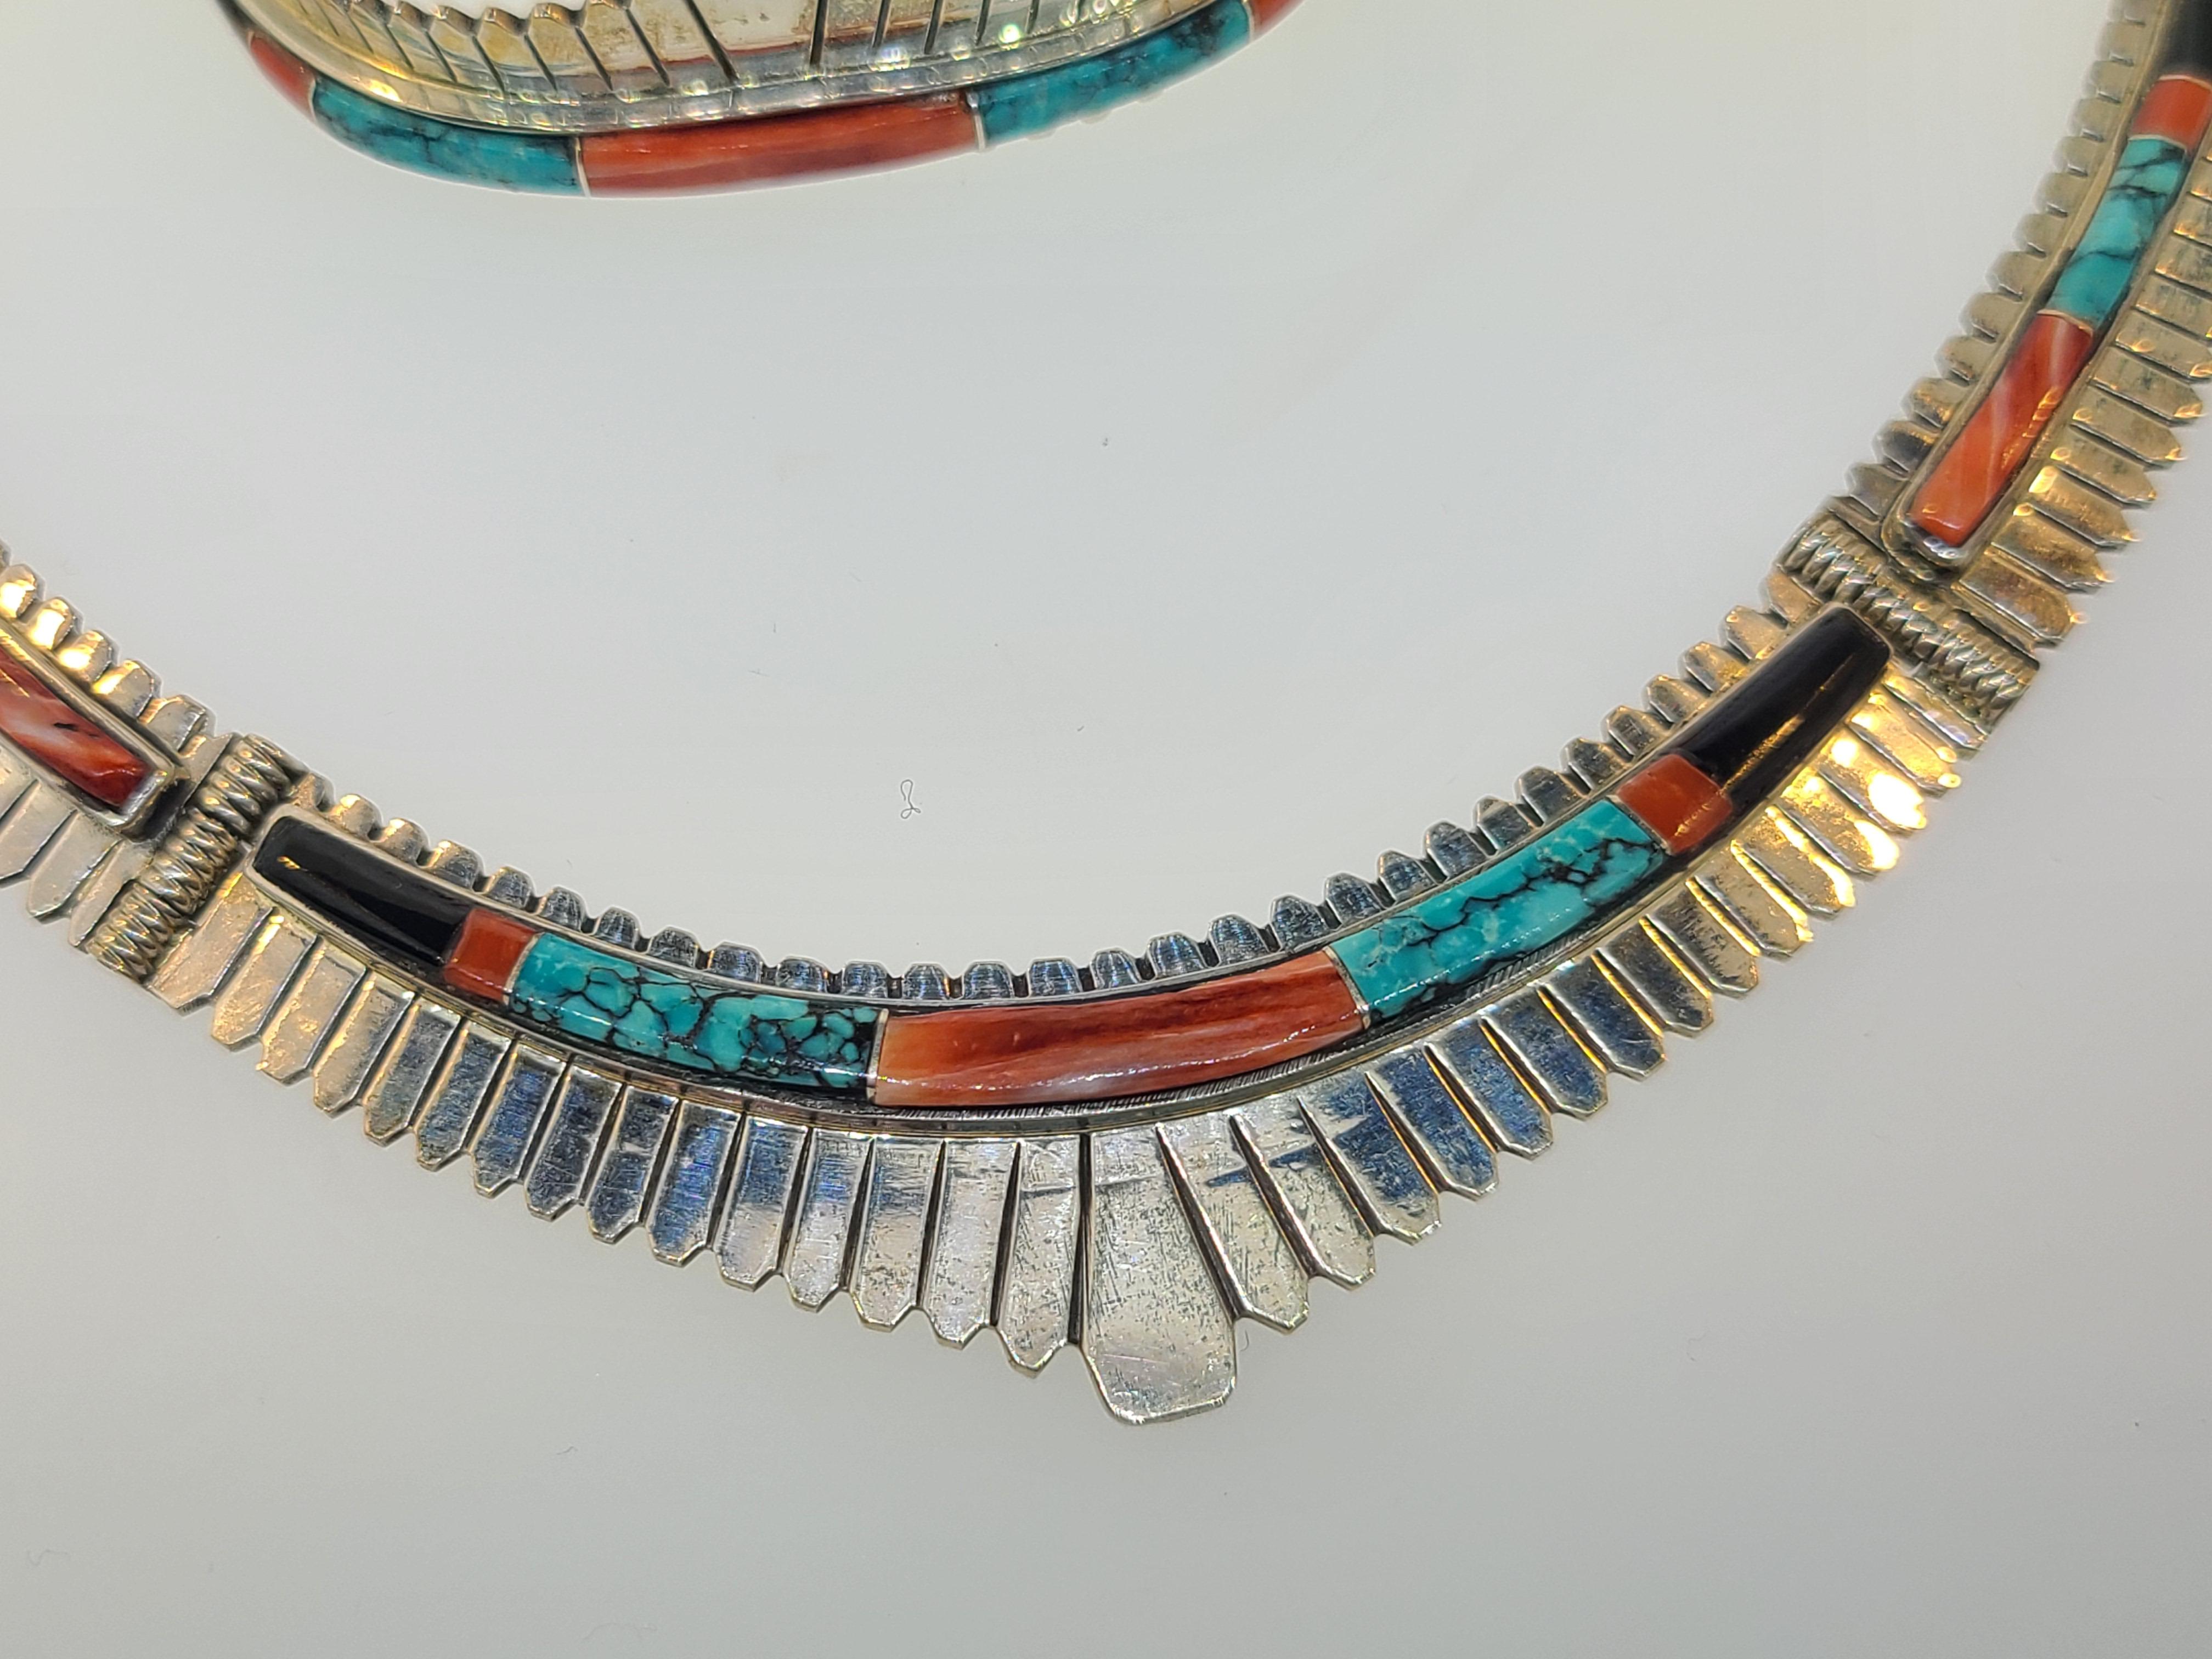 Baguette Cut Jay Boyd Navajo Pawn Turquoise, Coral, Jet Black Inlay Necklace & Bracelet